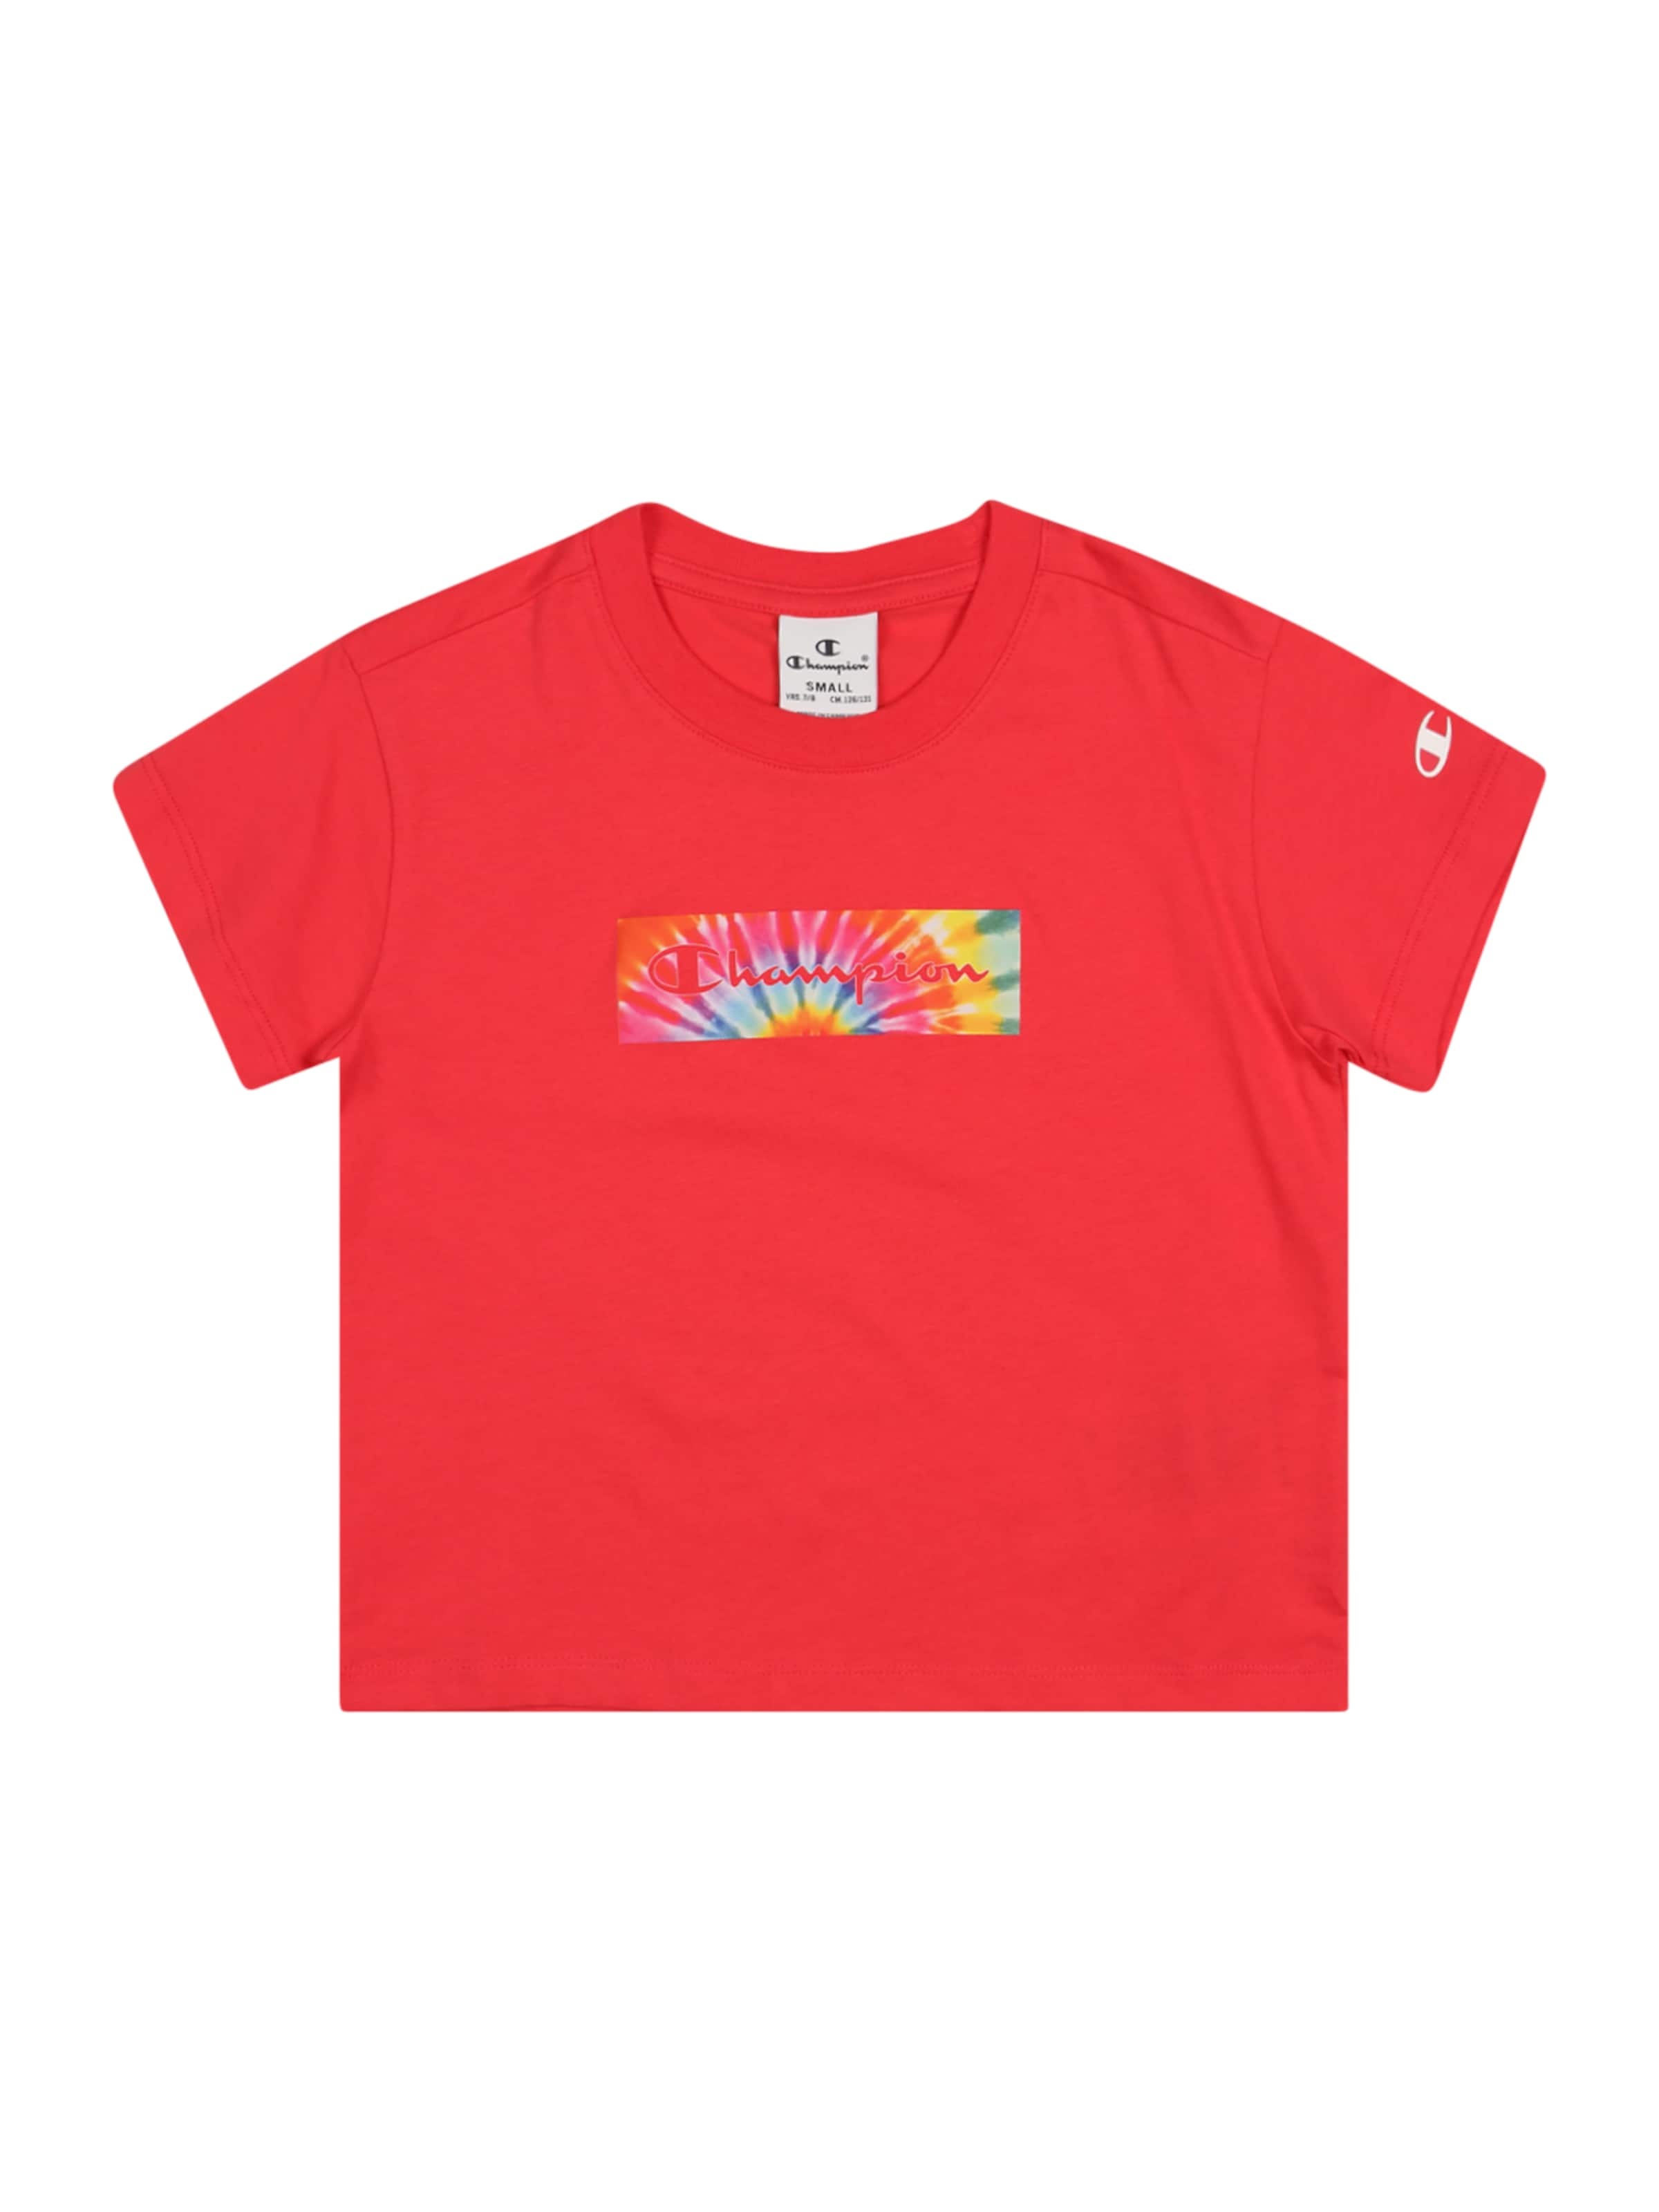 Kinder Teens (Gr. 140-176) Champion Authentic Athletic Apparel T-Shirt in Rot - WP92959